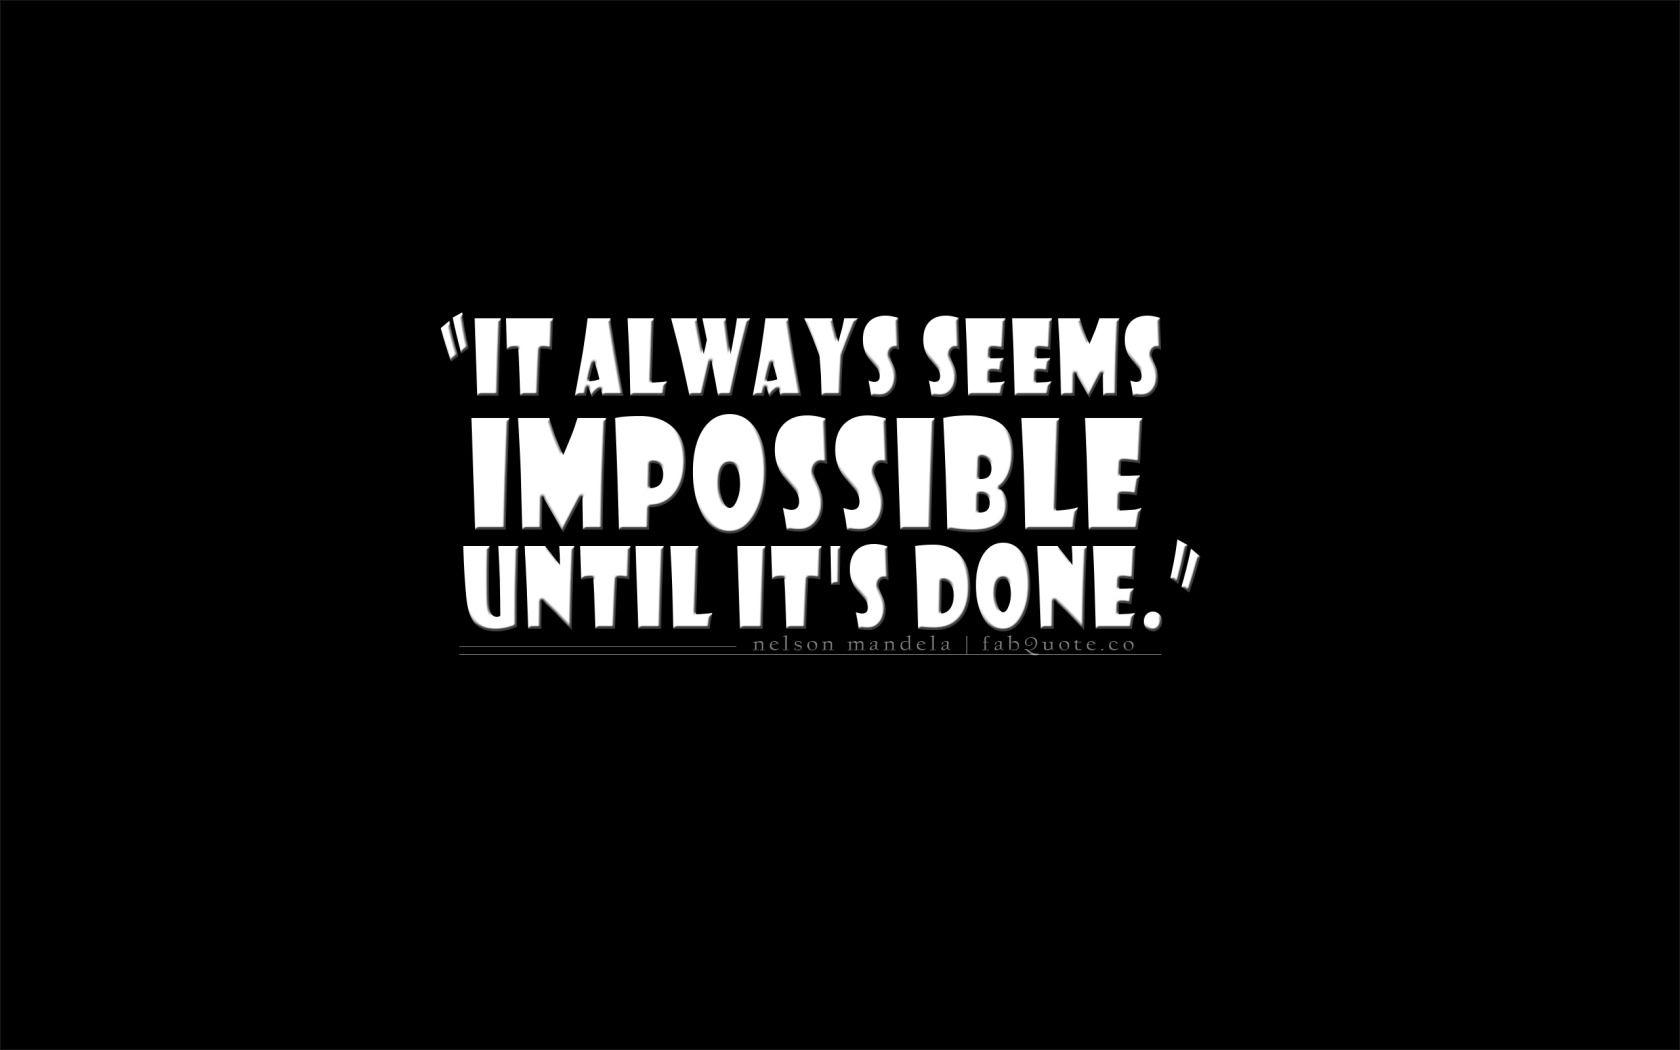 Nelson Mandela “Impossible until it's done” widescreen wallpaper